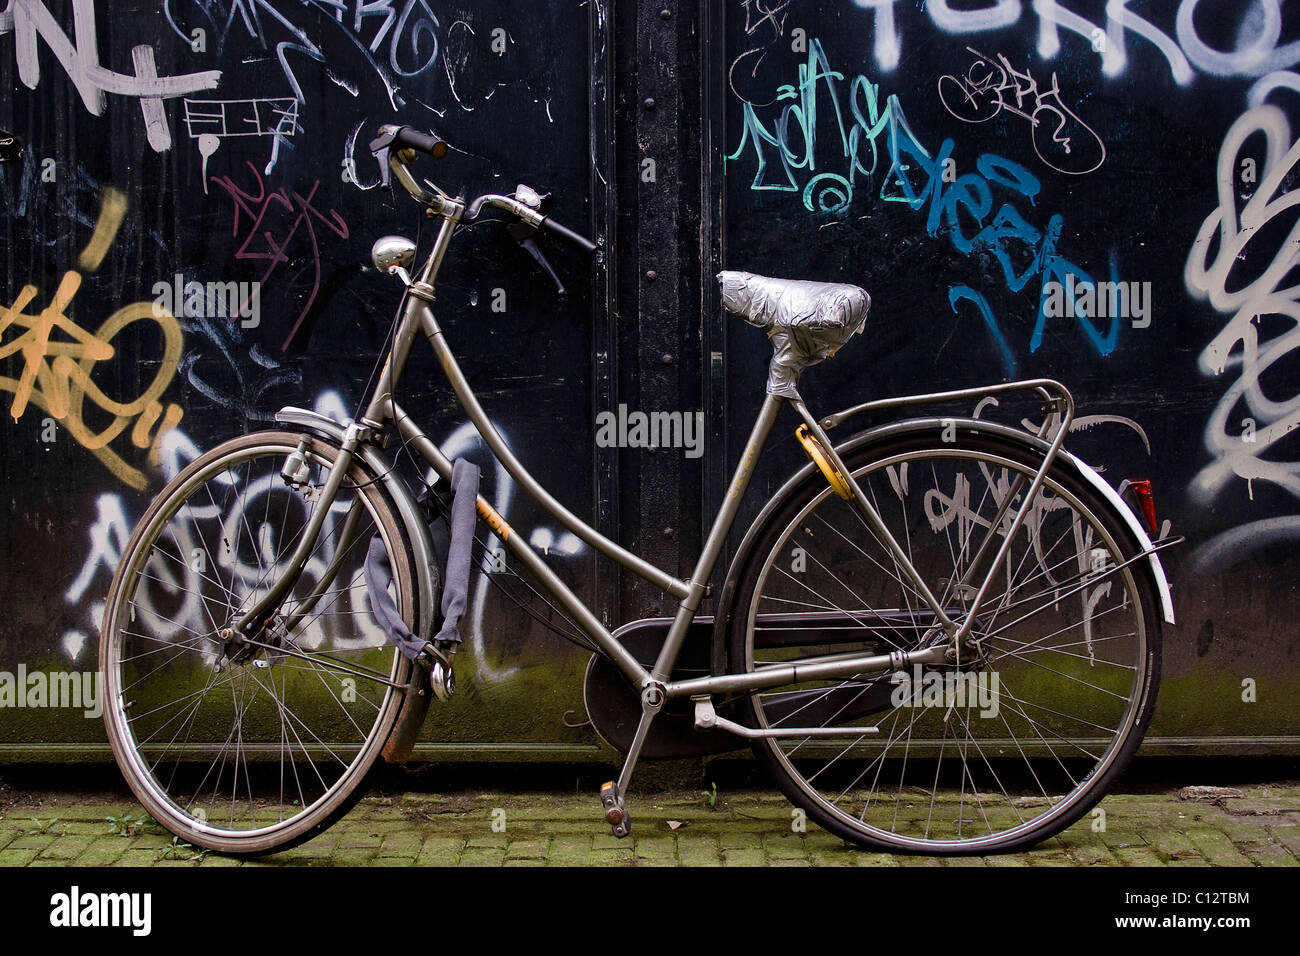 Bicycle parked by graffiti wall Stock Photo